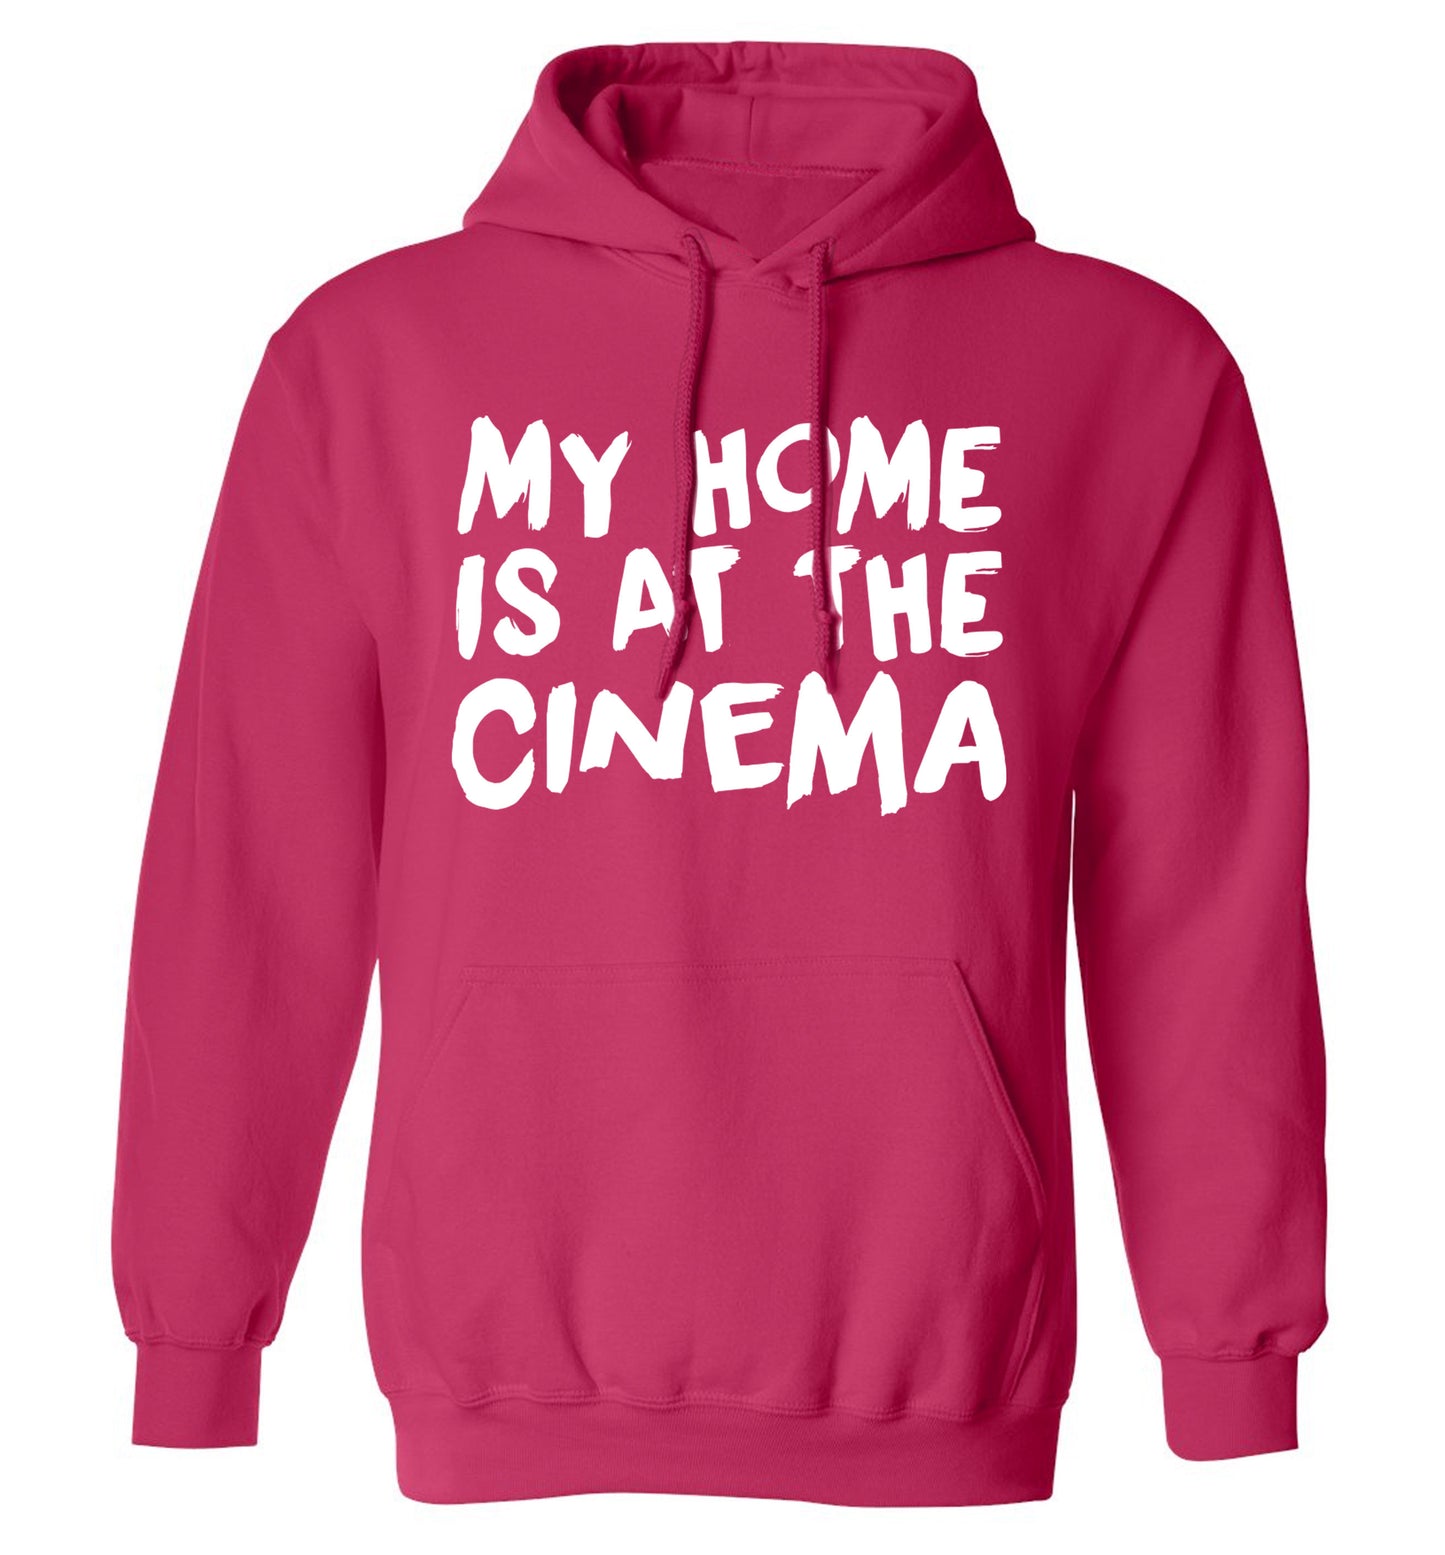 My home is at the cinema adults unisex pink hoodie 2XL